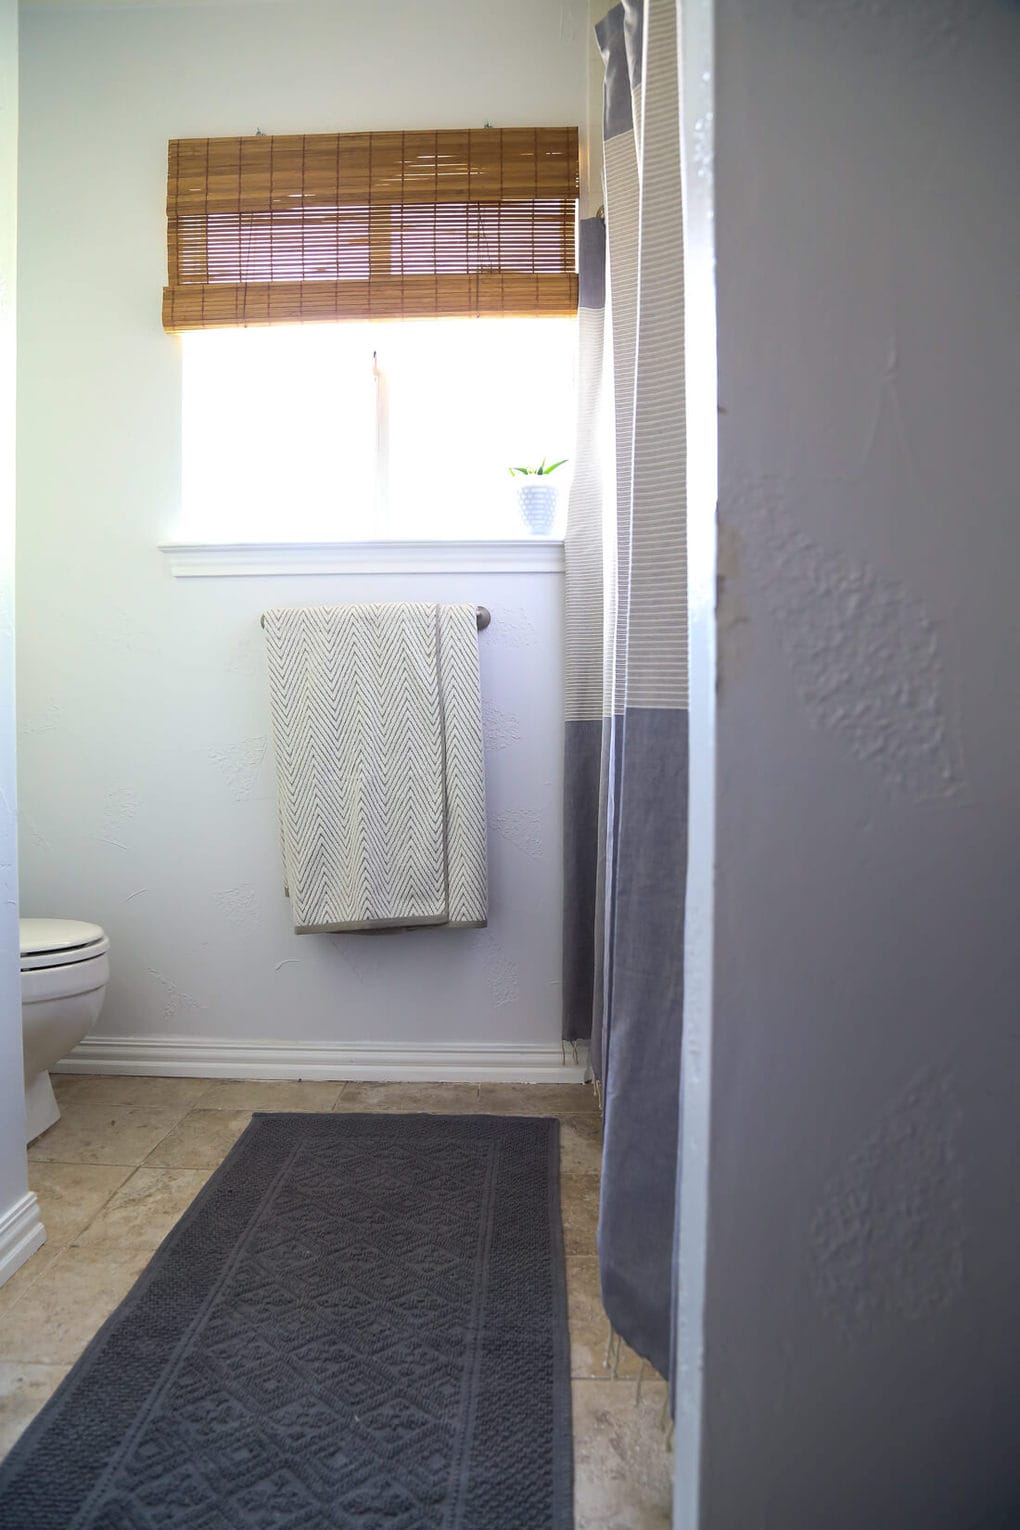 aA DIY modern, serene bathroom renovation that can be completed in a weekend. Great ideas for how to upgrade an ugly bathroom and make it look like new without a ton of time or money.